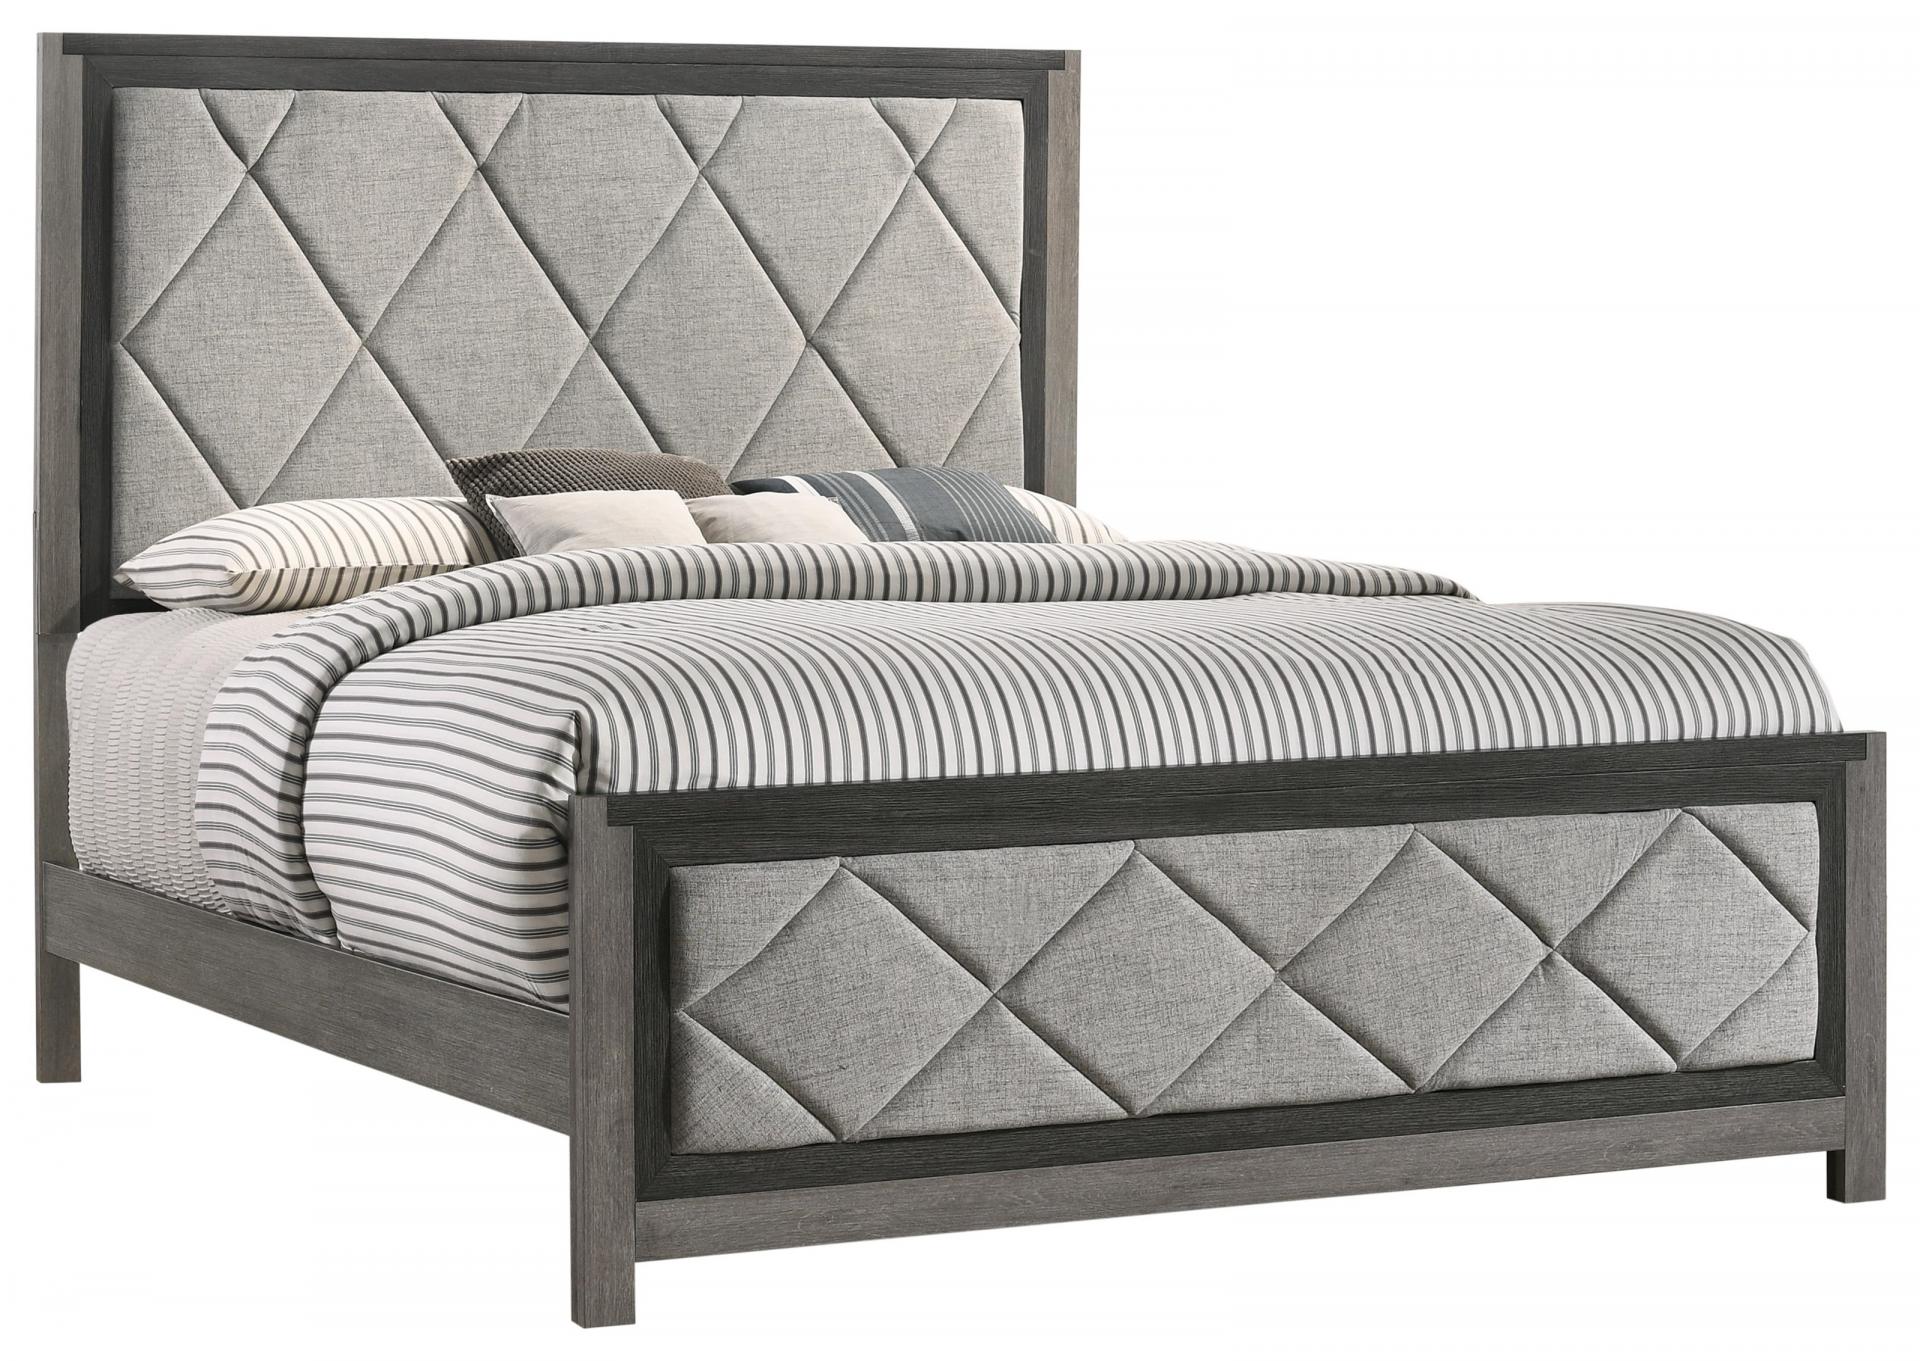 Panel Bedroom Set in Gray Two Tone with Panel Bed, Dresser, Mirror, and Nightstand